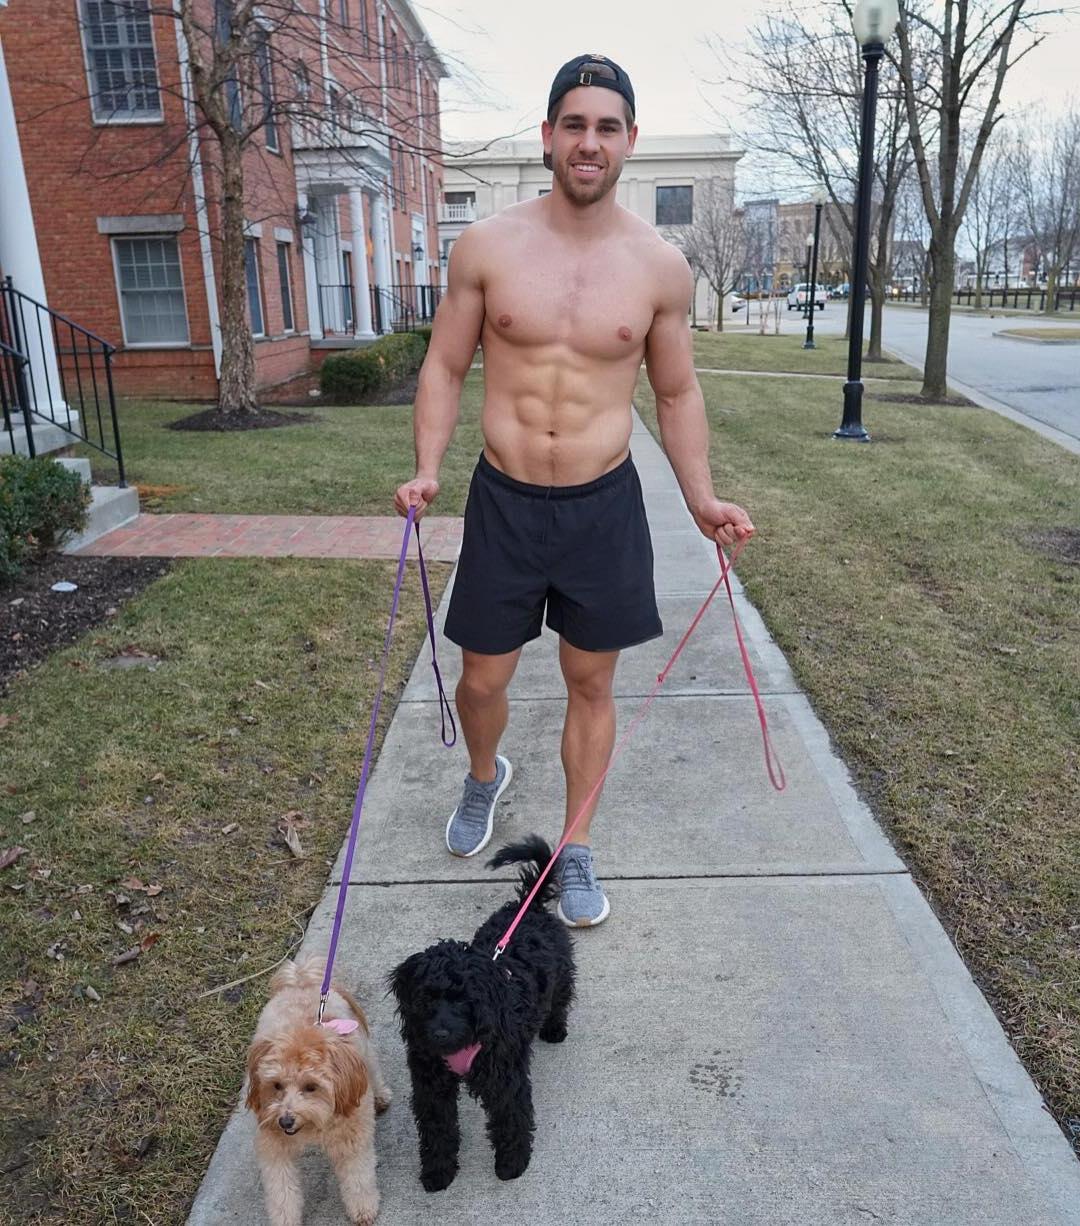 cute-smiling-happy-dude-shirtless-fit-body-dog-walker-street